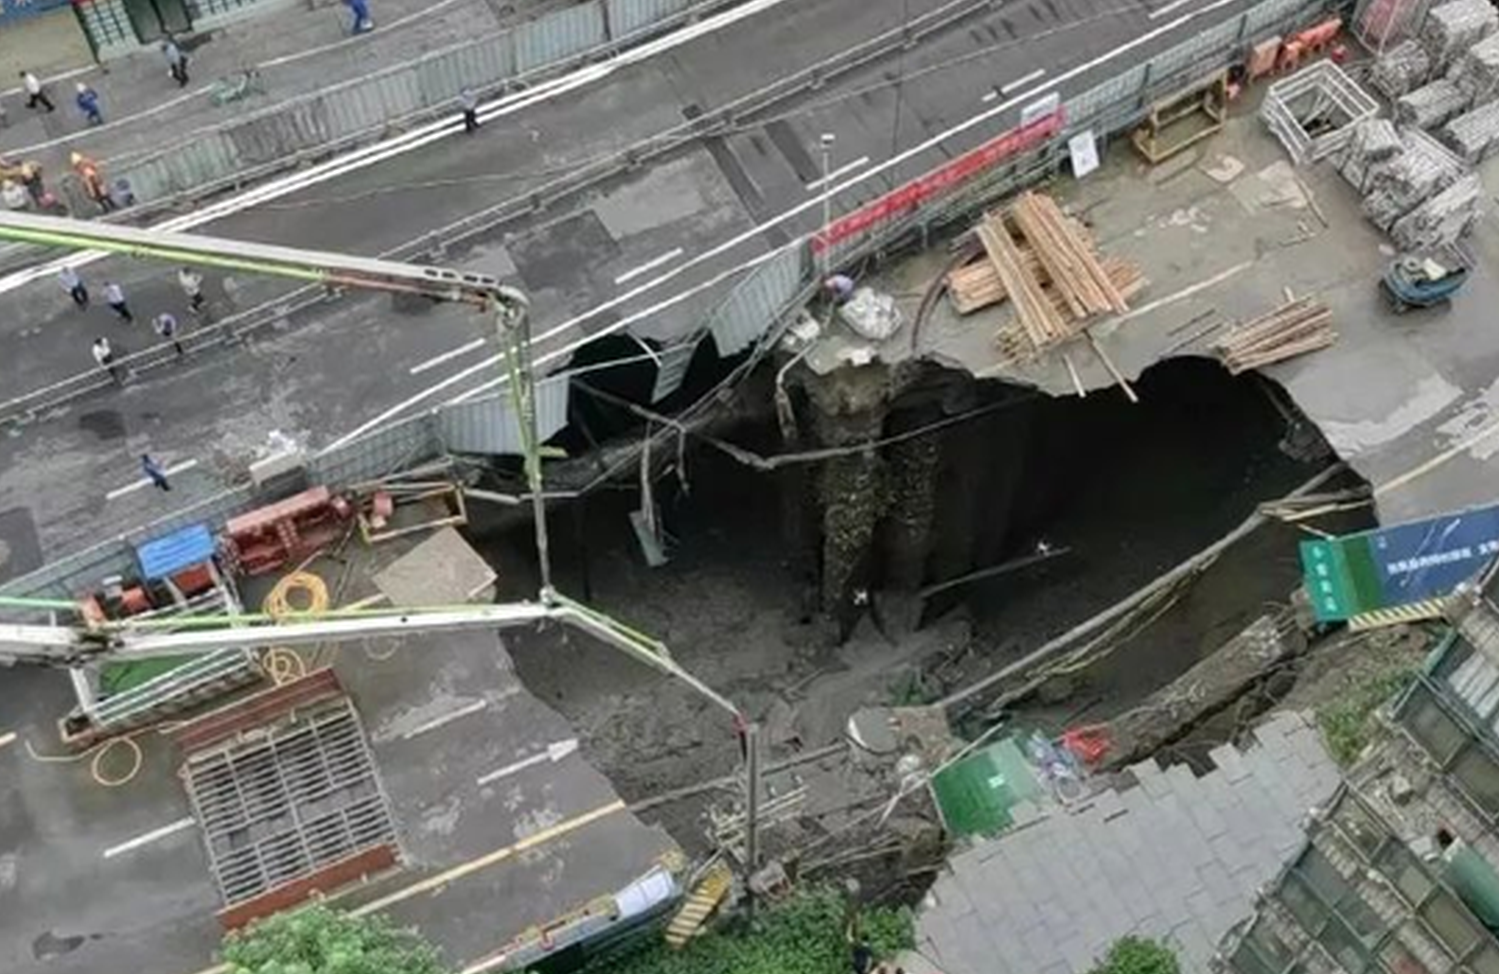 Road collapses near Metro Line construction site in Chengdu, no casualties reported